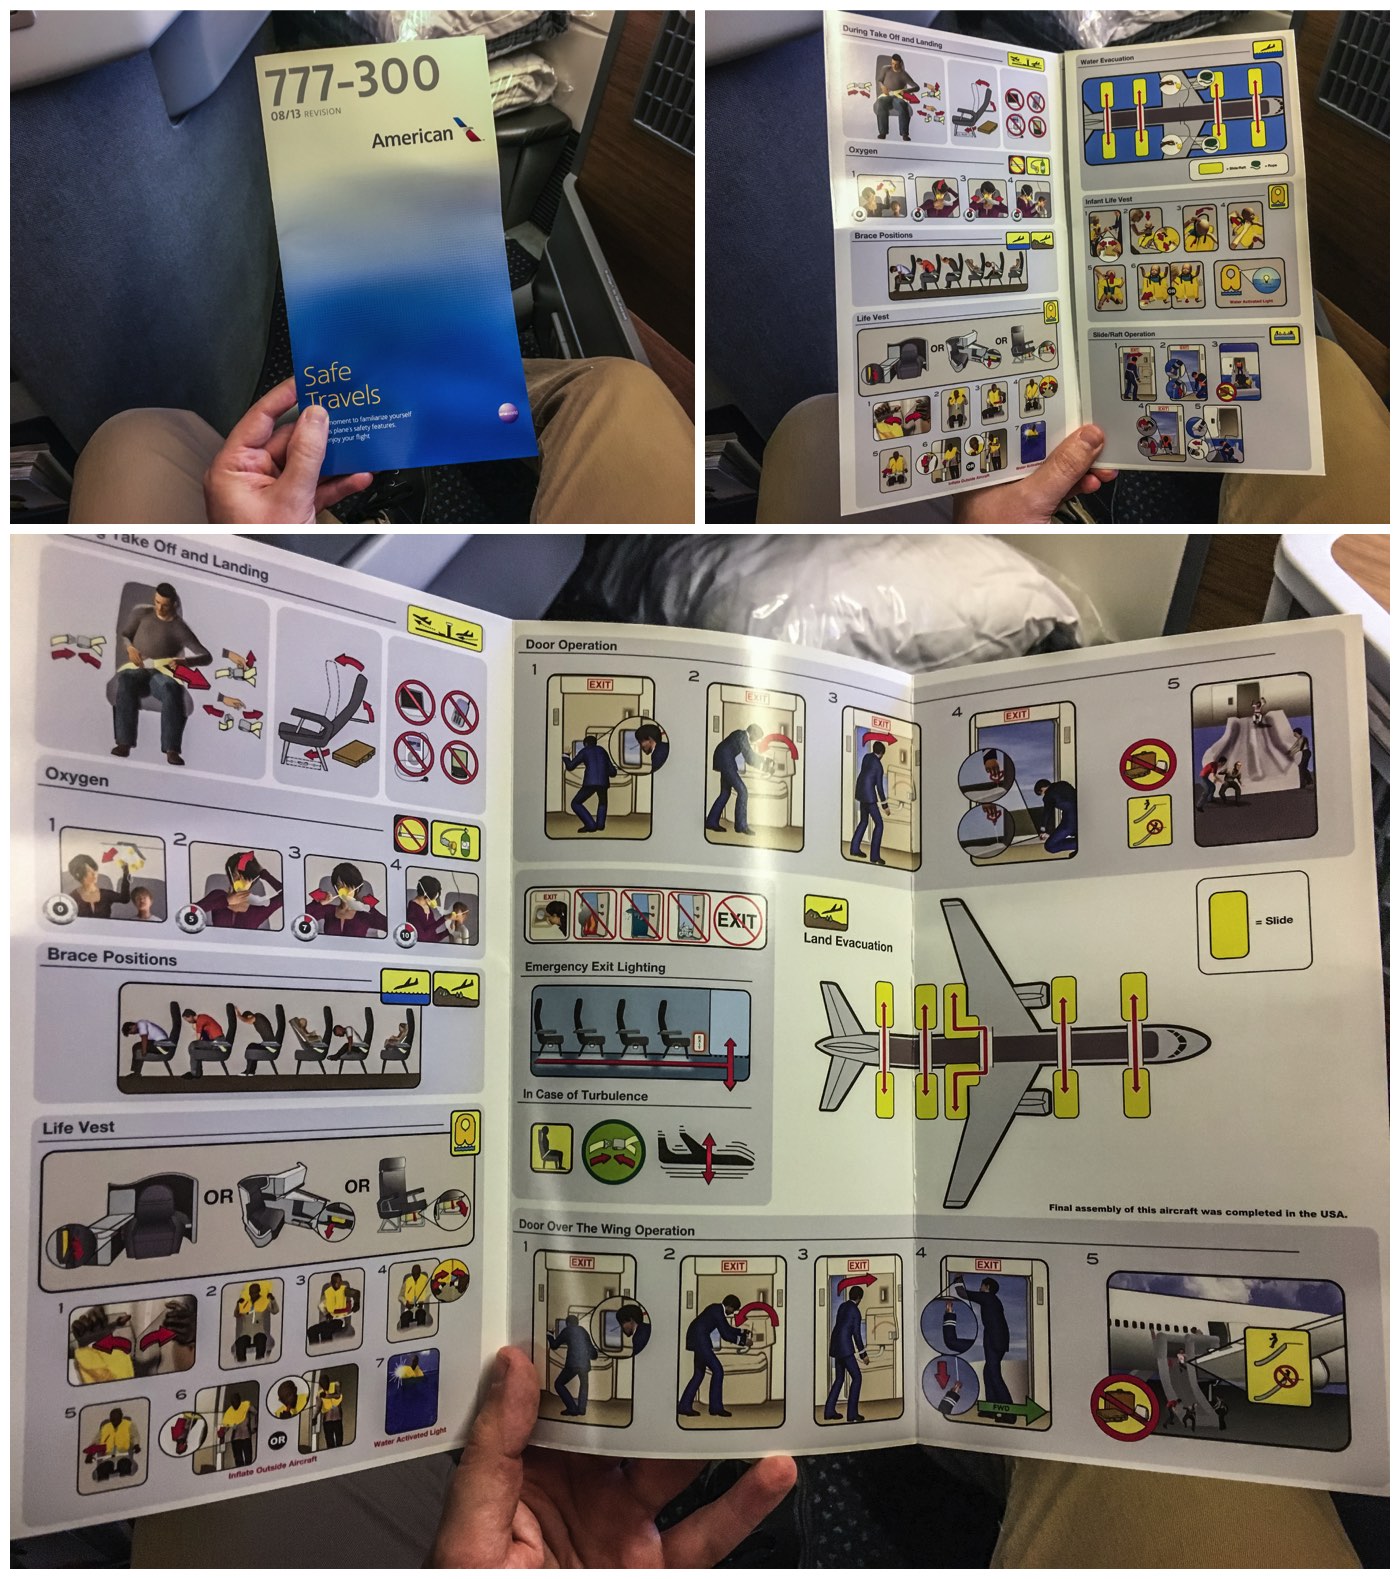 American Airlines 777–300 safety card